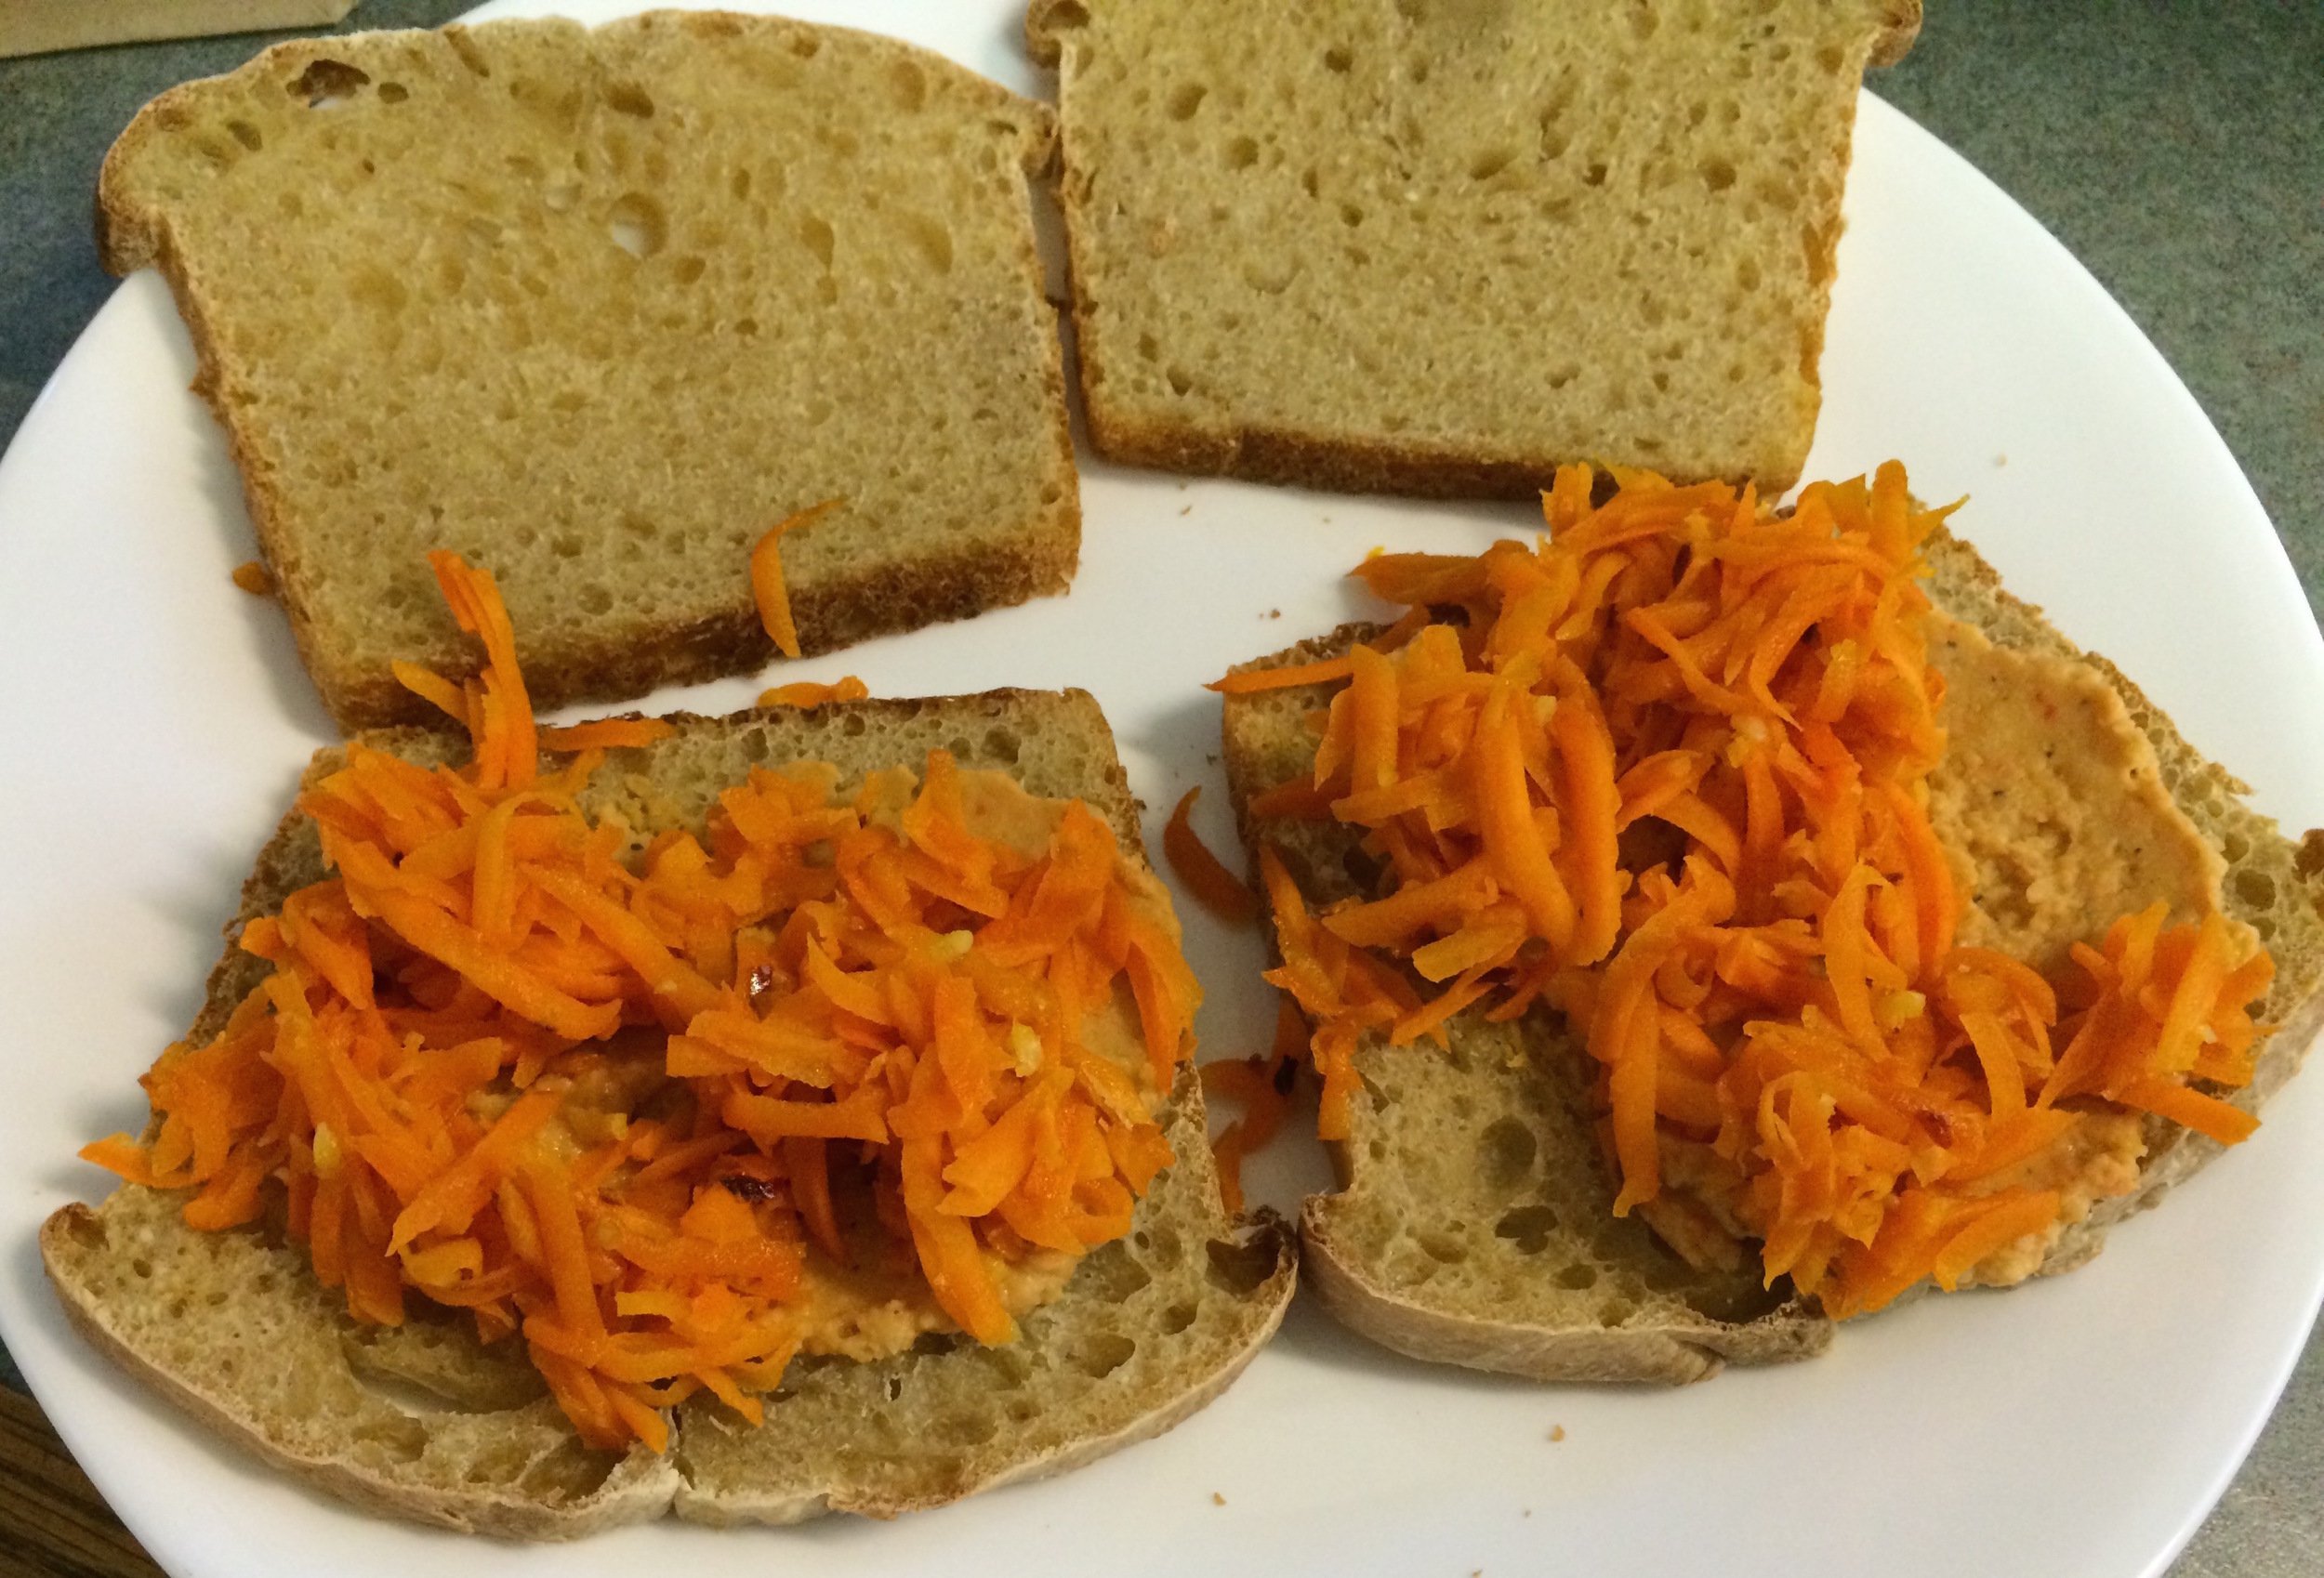 Spicy Carrot Sandwiches